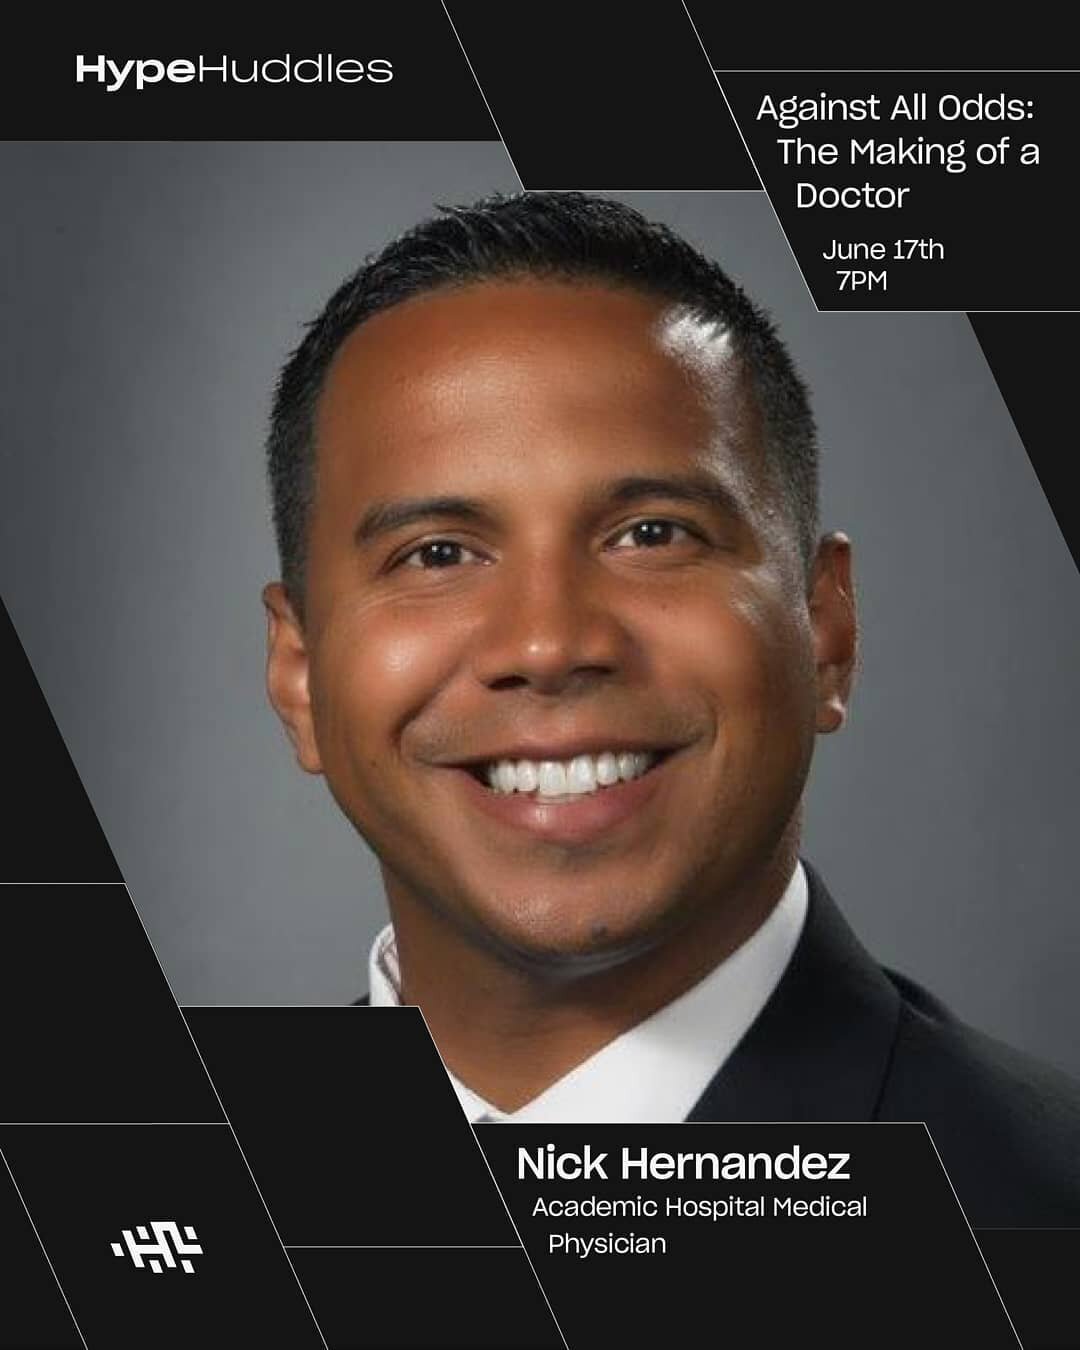 Against All Odds: The Making of a Doctor
.
This Thursday's HypeHuddle will introduce Dr. Nick Hernandez, a New York native of Peruvian and Puerto Rican descent, who proves that through hard work and perseverance your dreams are always attainable. Whe